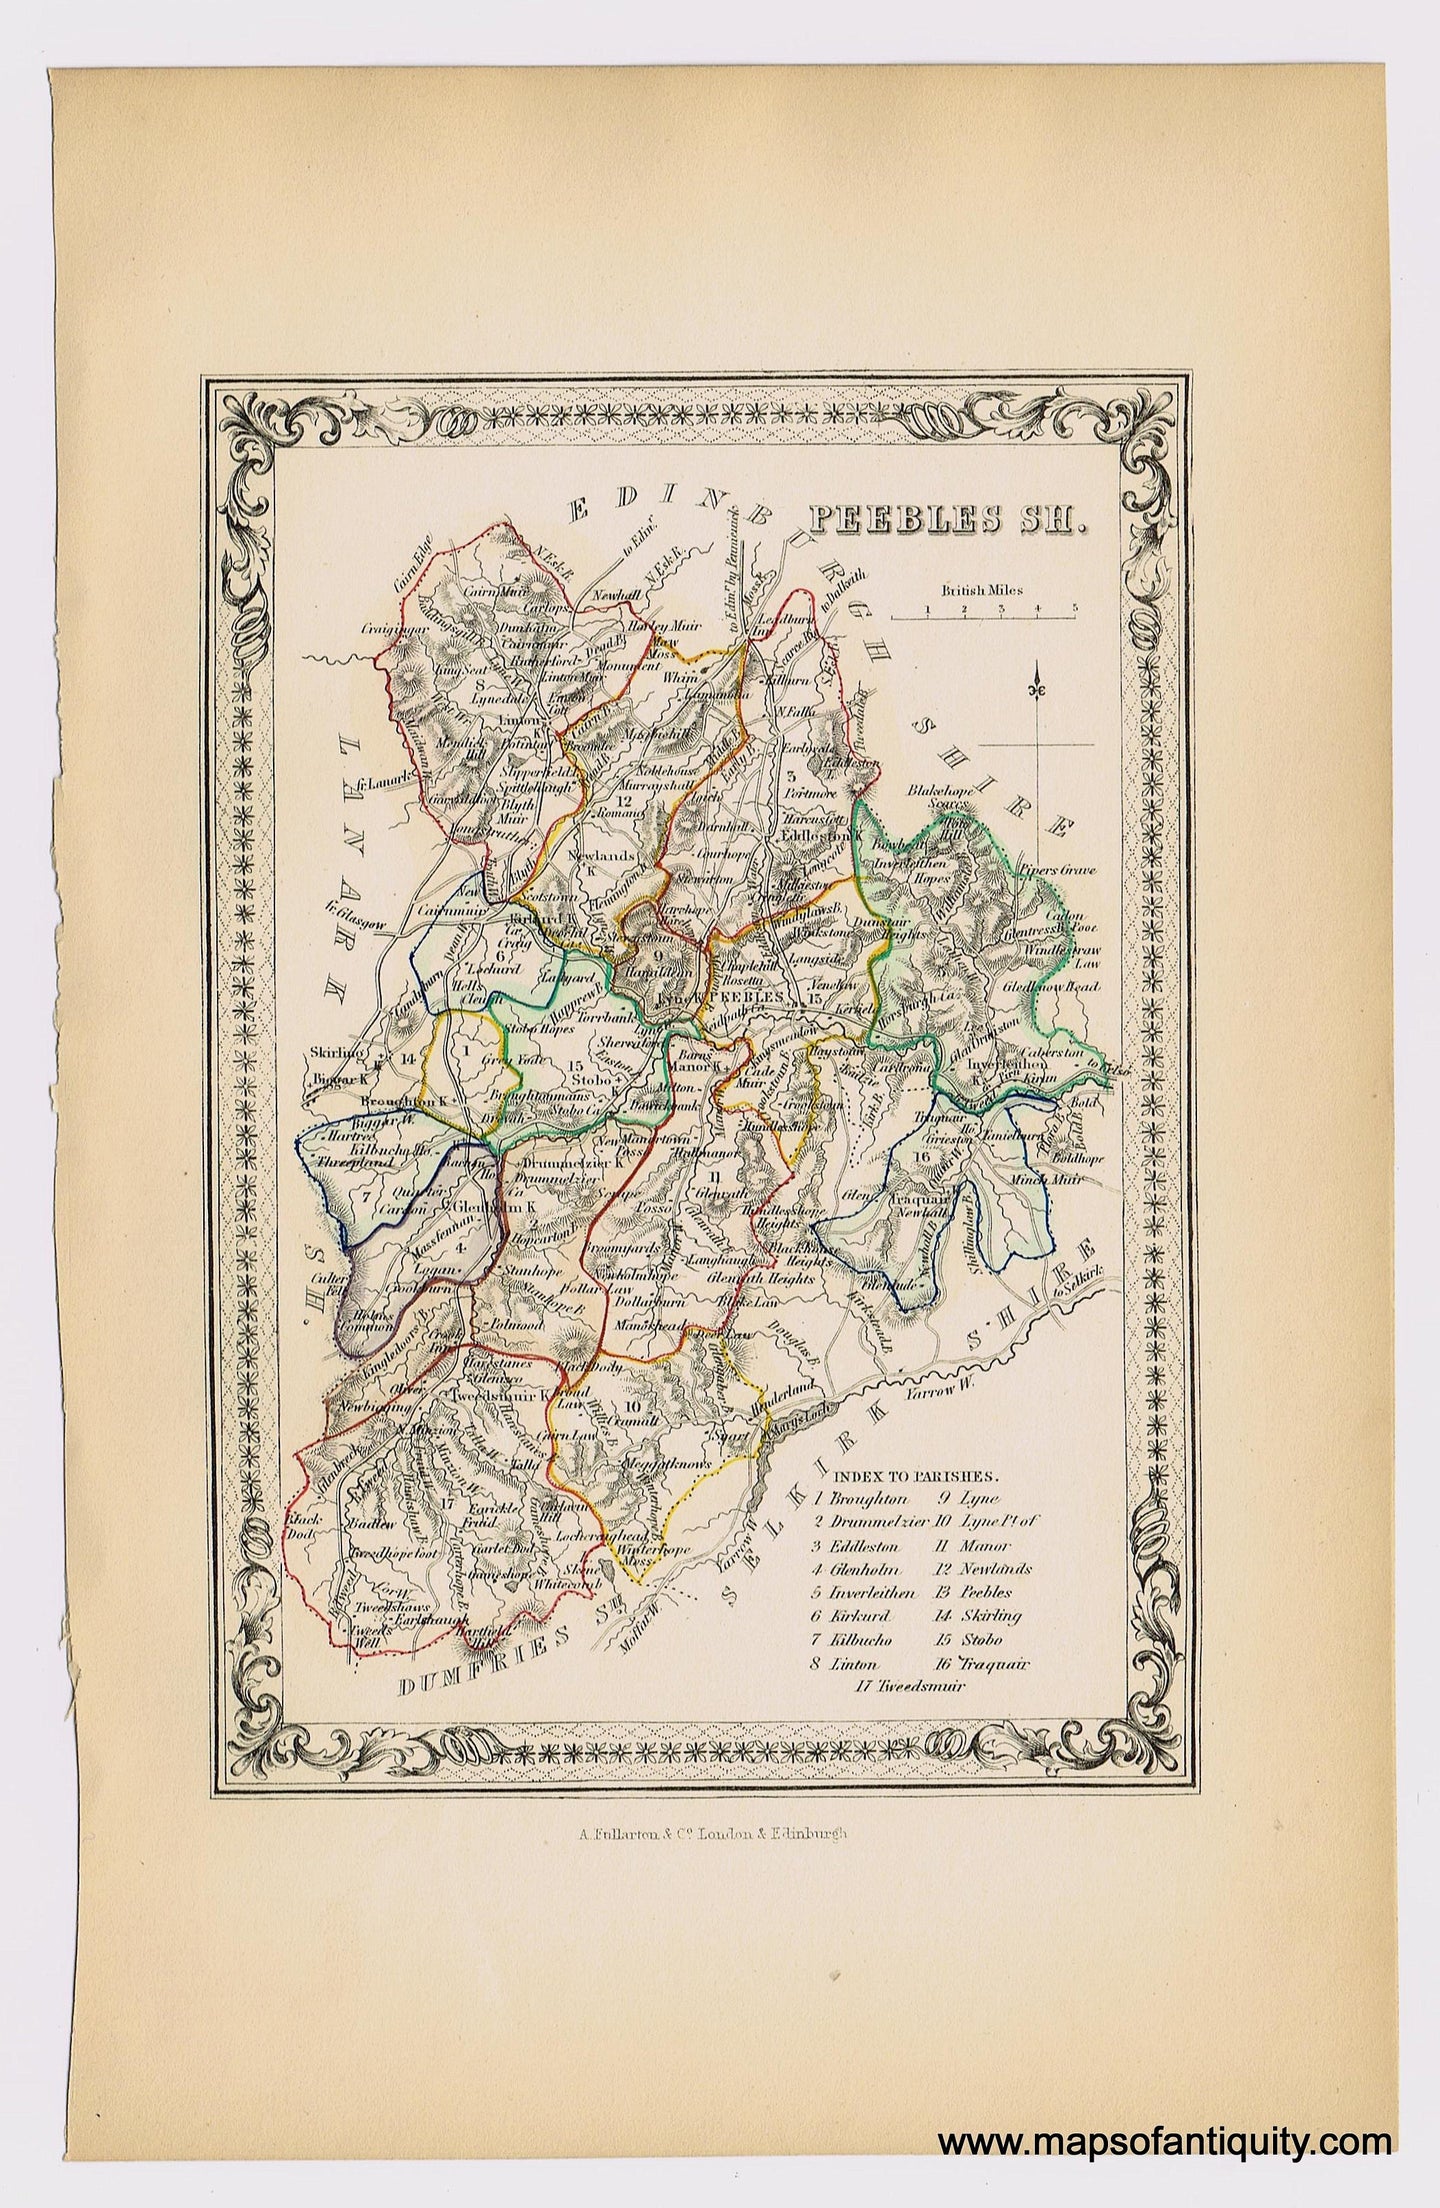 Genuine-Antique-Hand-colored-Map-Peebles-Shire-1855-A-Fullarton-Co--Maps-Of-Antiquity